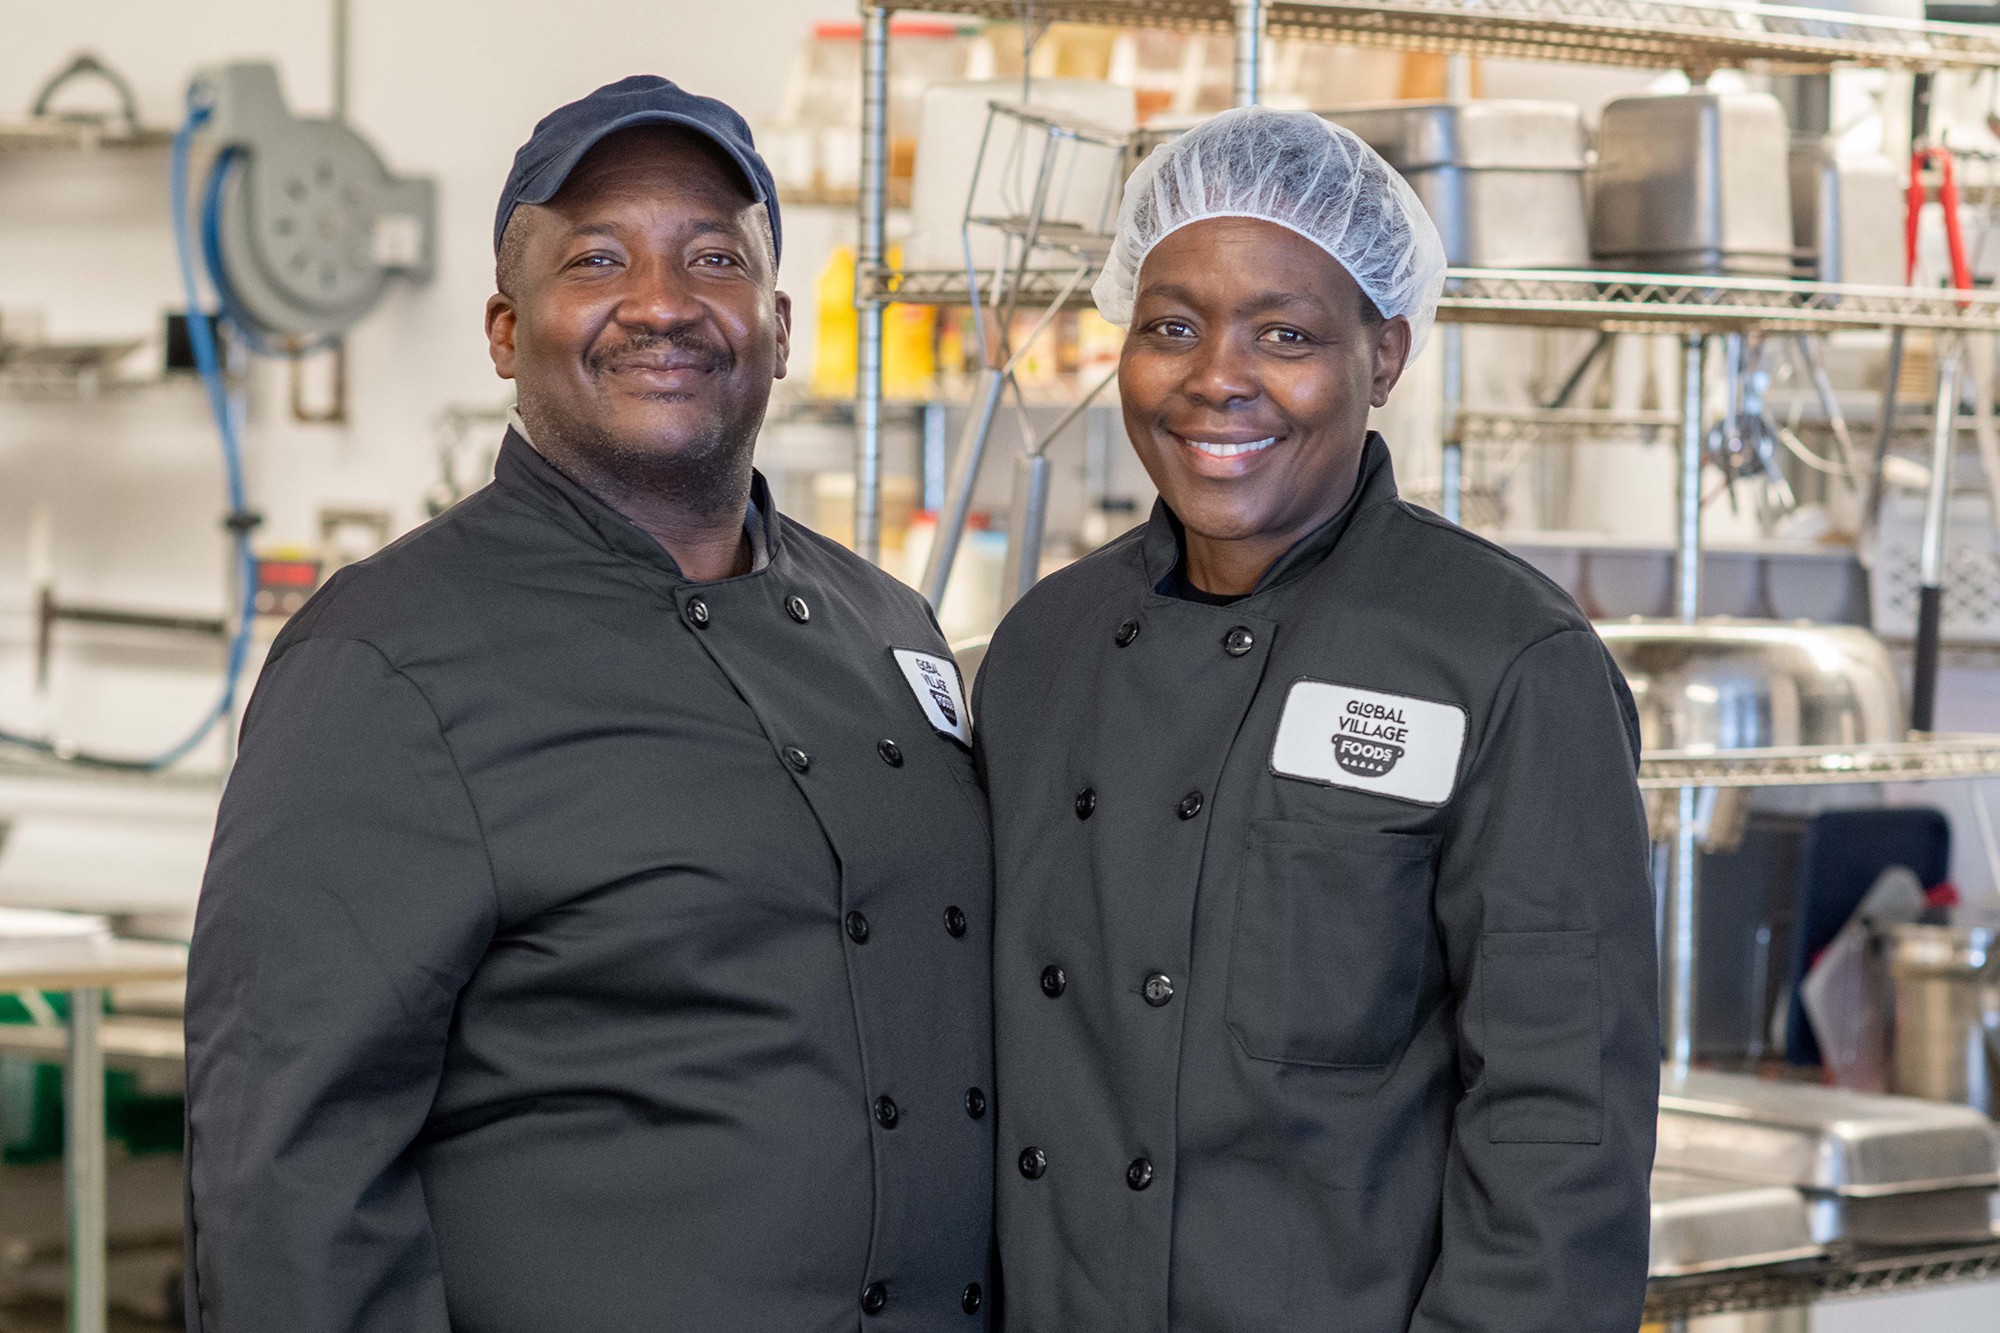 A trained chef in Kenya, Damaris Hall, right, emigrated to the United States in 1991 with her now husband and business partner, Mel. In 2016, the couple launched Global Village Foods in Quechee. Photo by Erica Houskeeper.